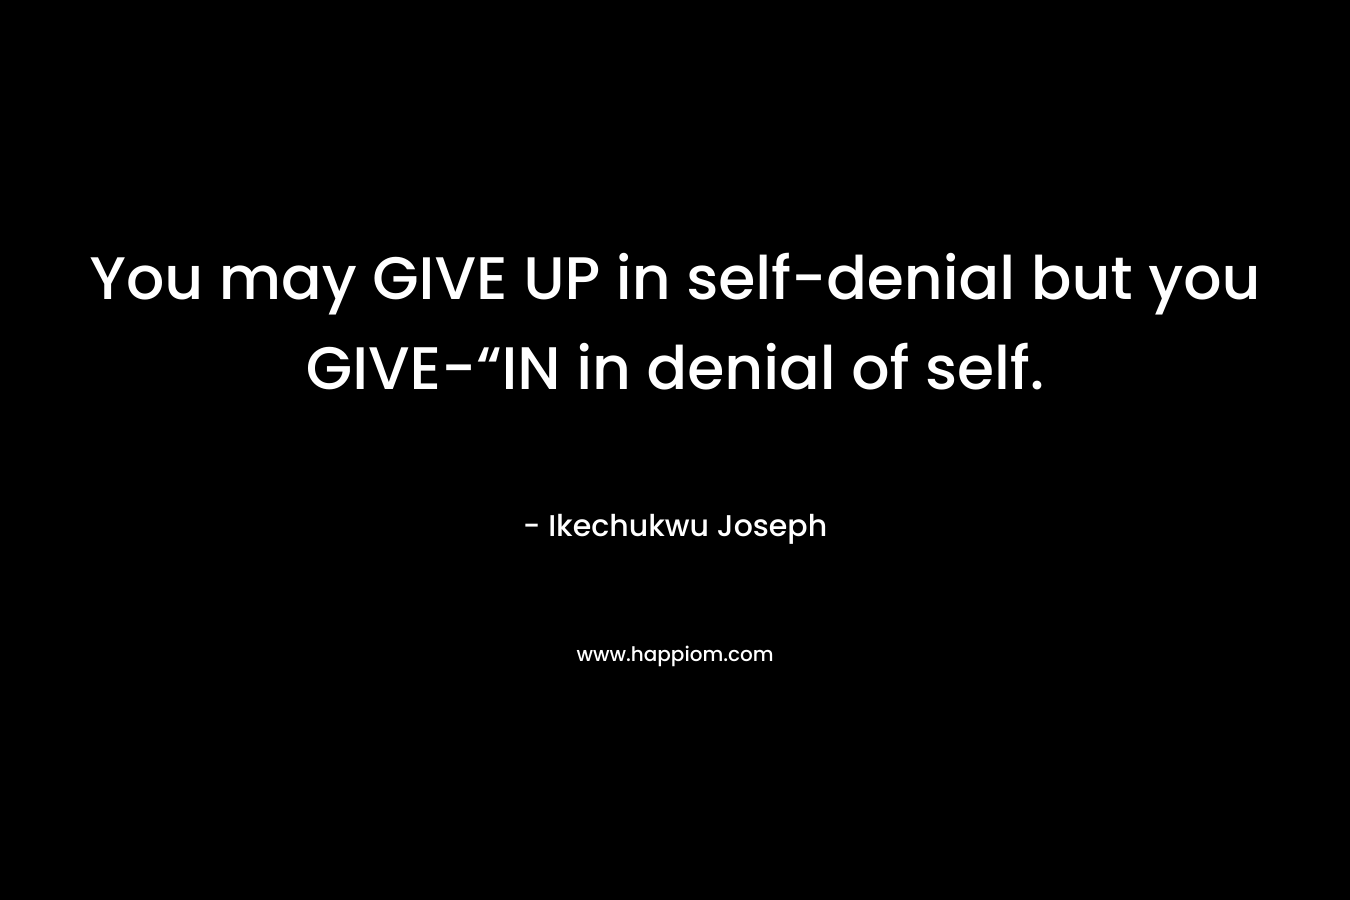 You may GIVE UP in self-denial but you GIVE-“IN in denial of self.